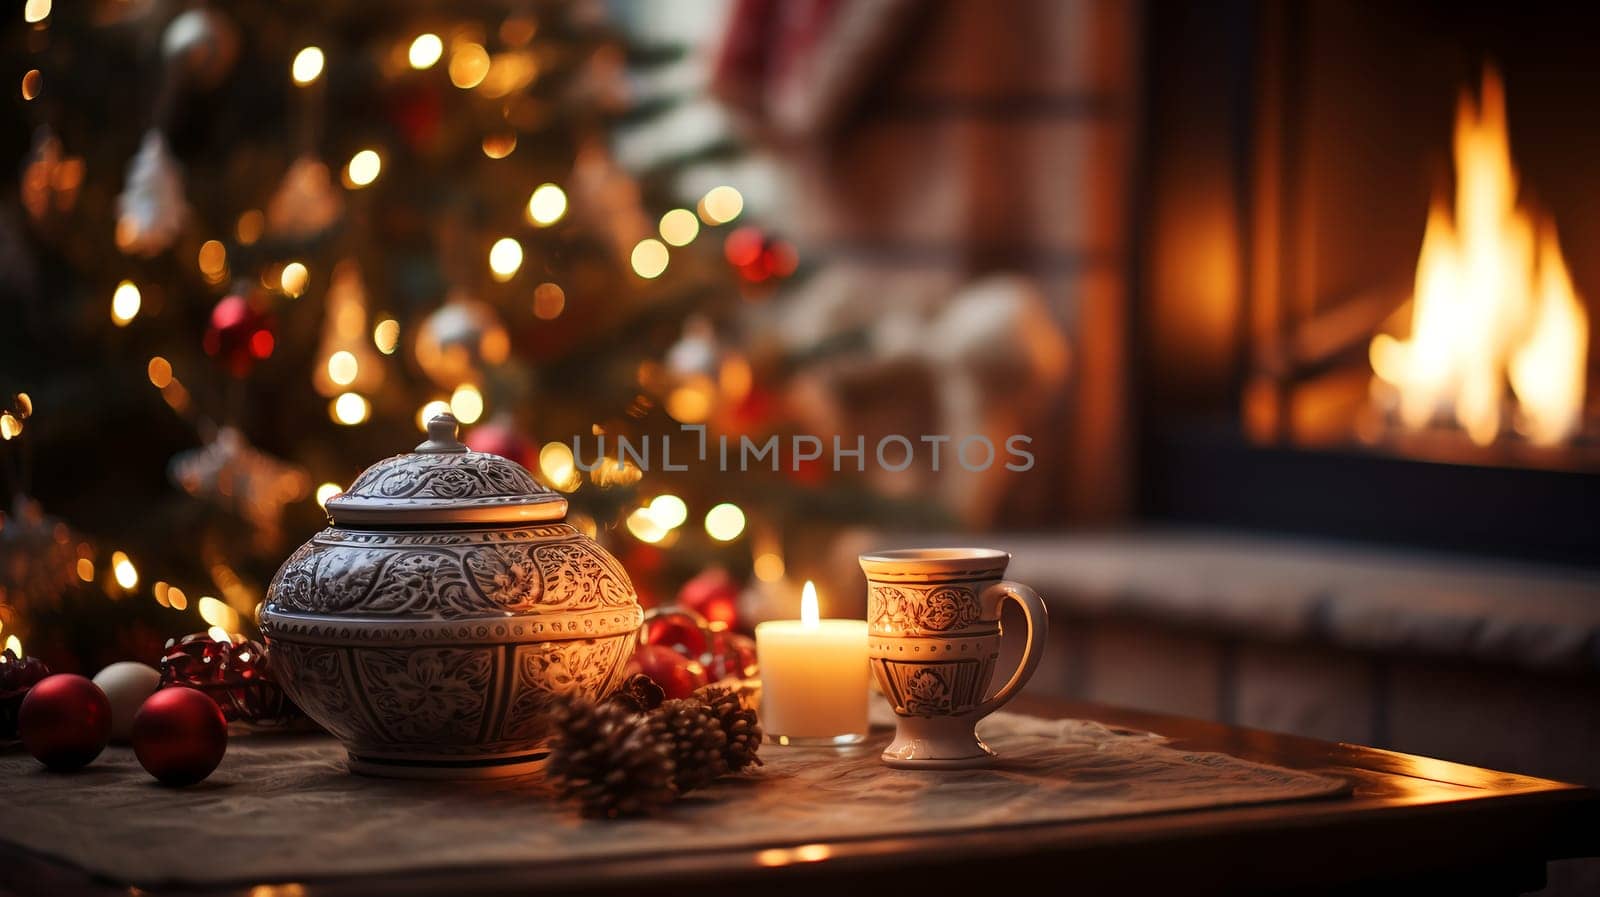 Luxury Christmas backgrounds. Christmas background with Christmas balls with bokeh effect. AI generated.